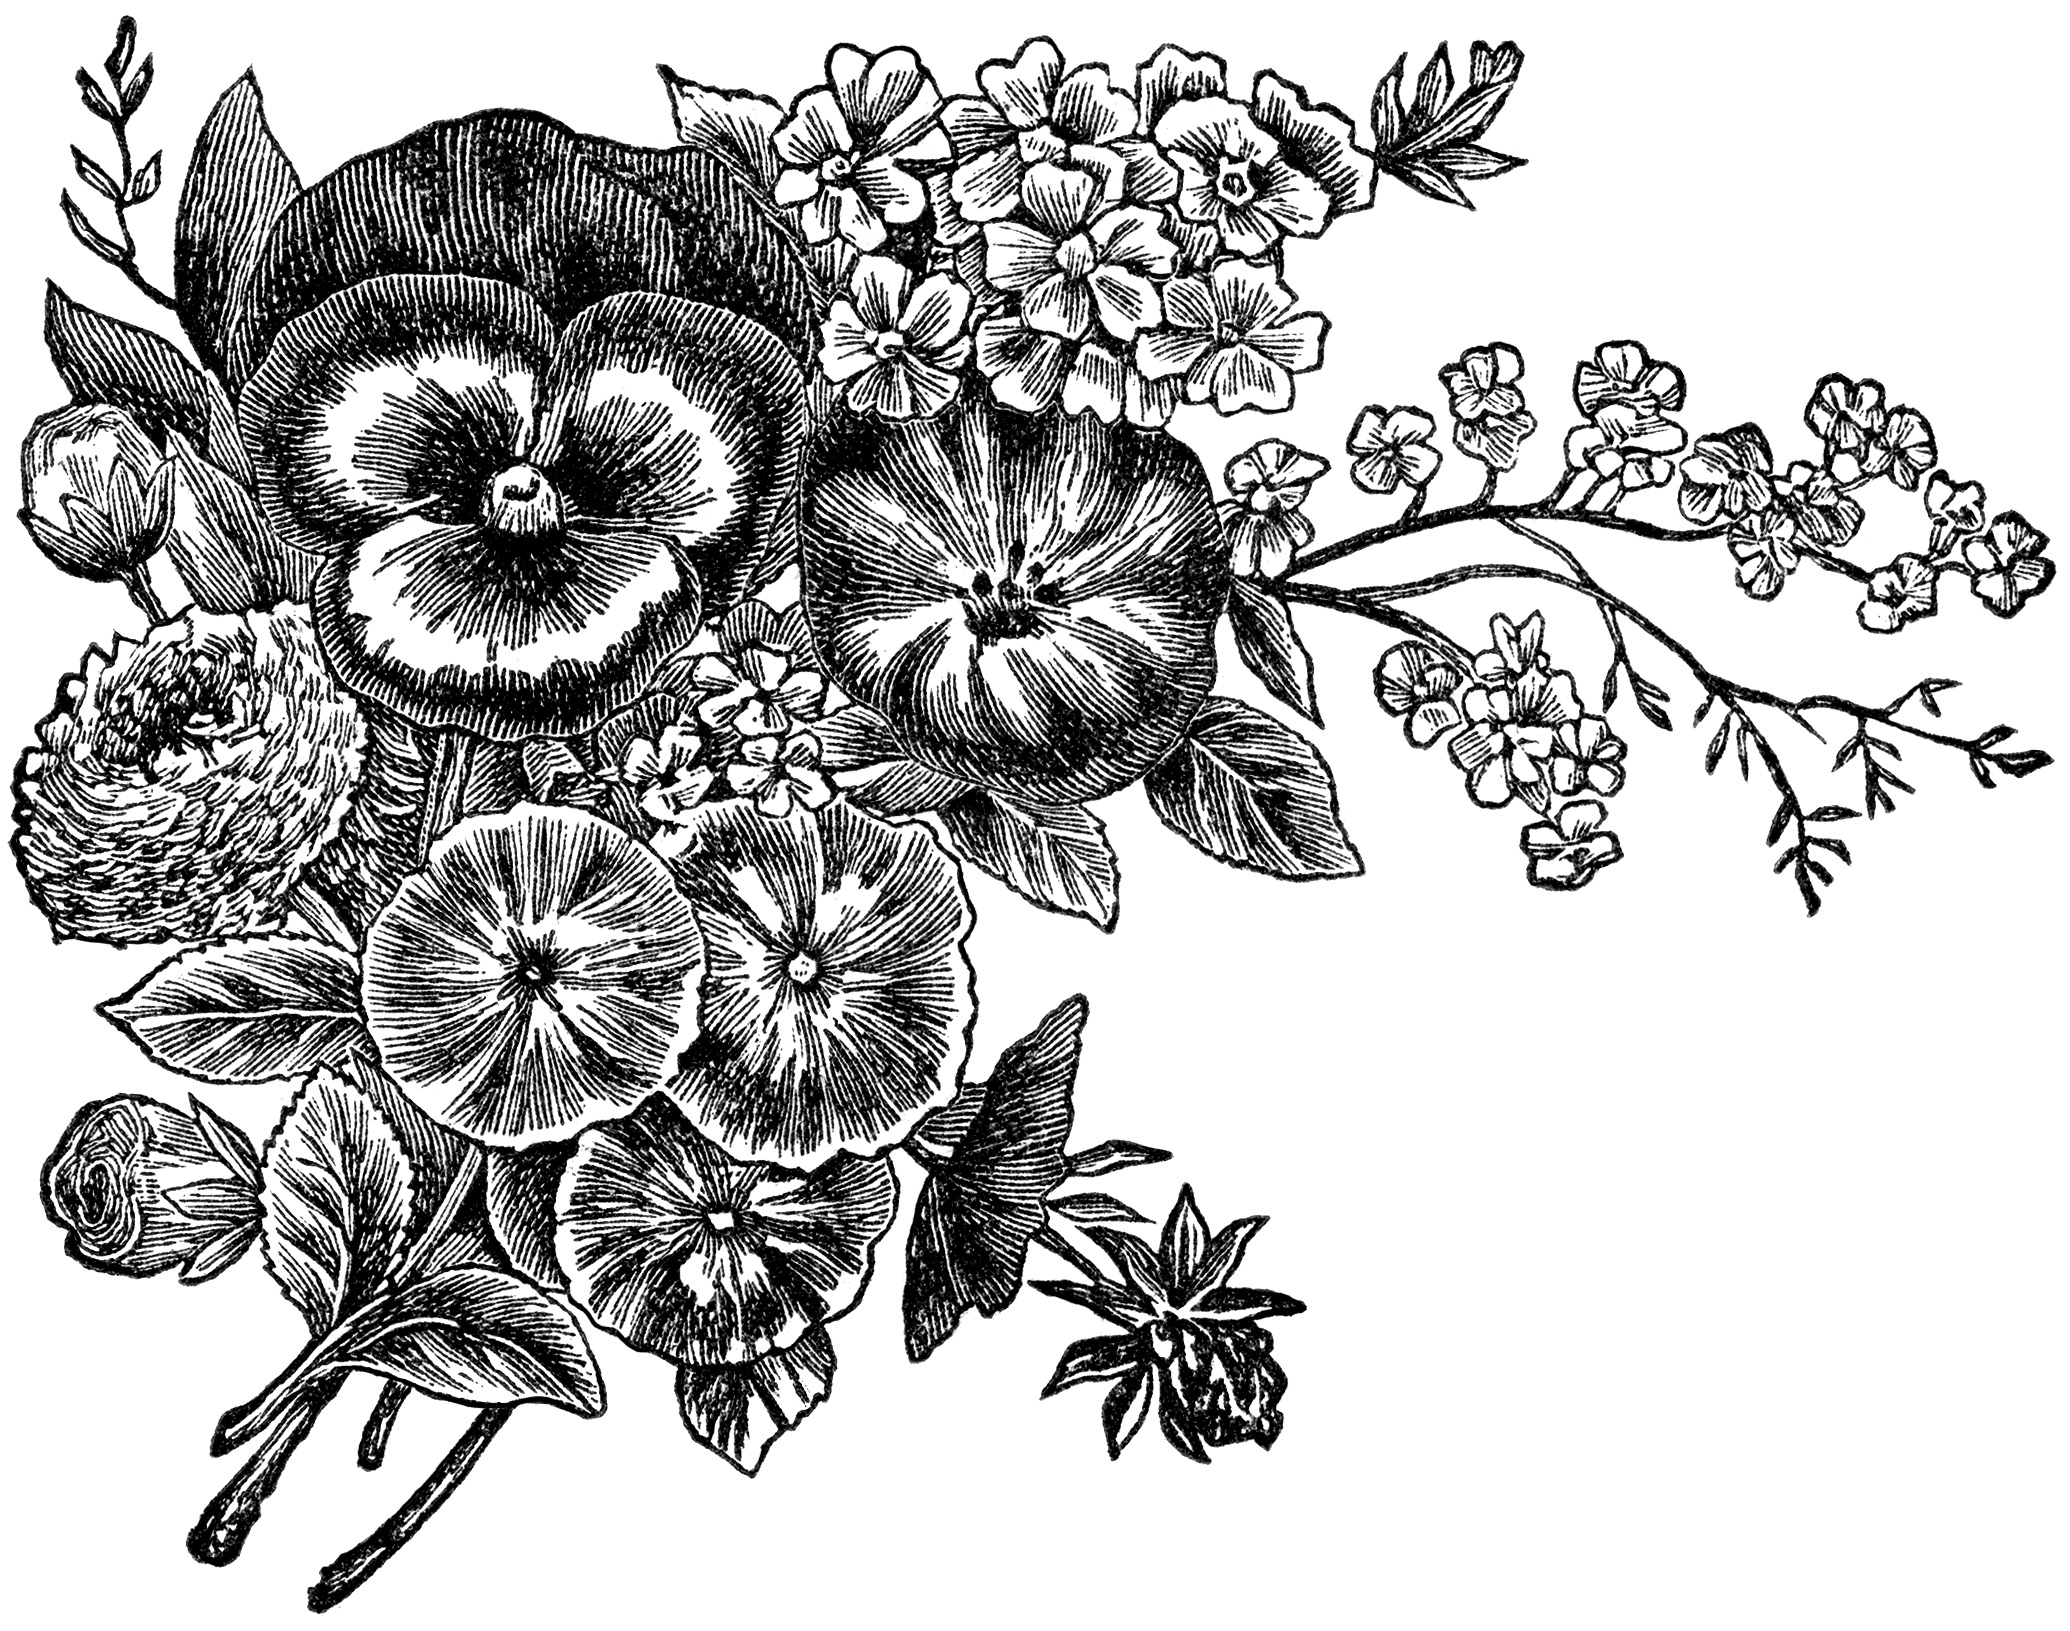 Black and white floral design clipart dromhje top 2